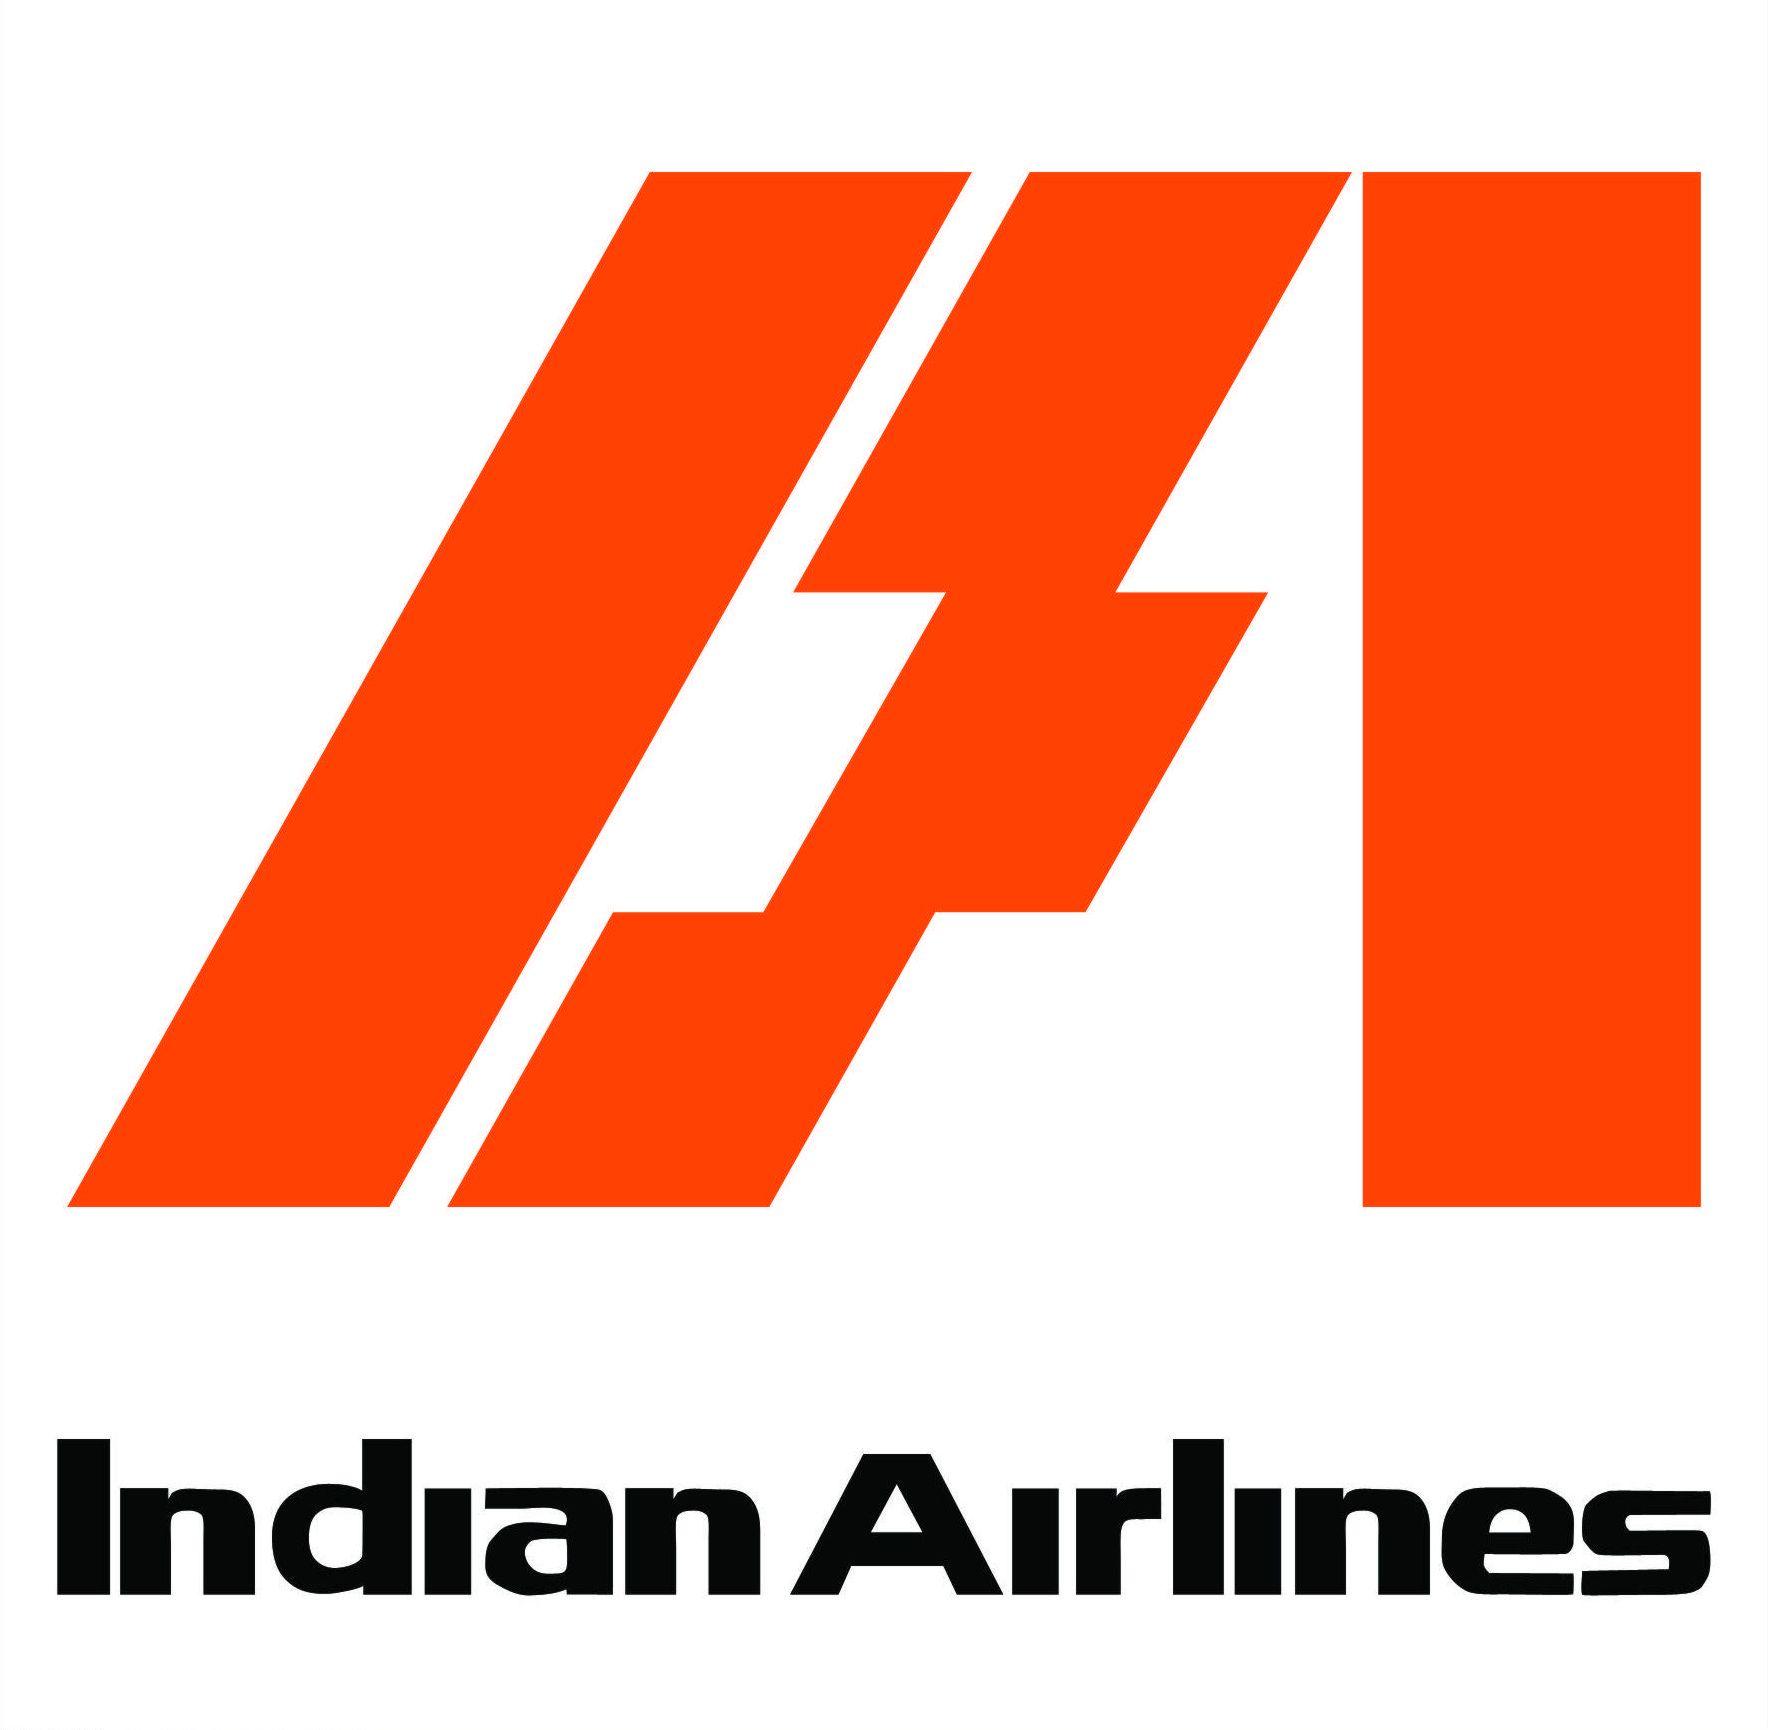 Indian Airways Logo - Indian Airlines, New Delhi, India #IndianAirlines L14473